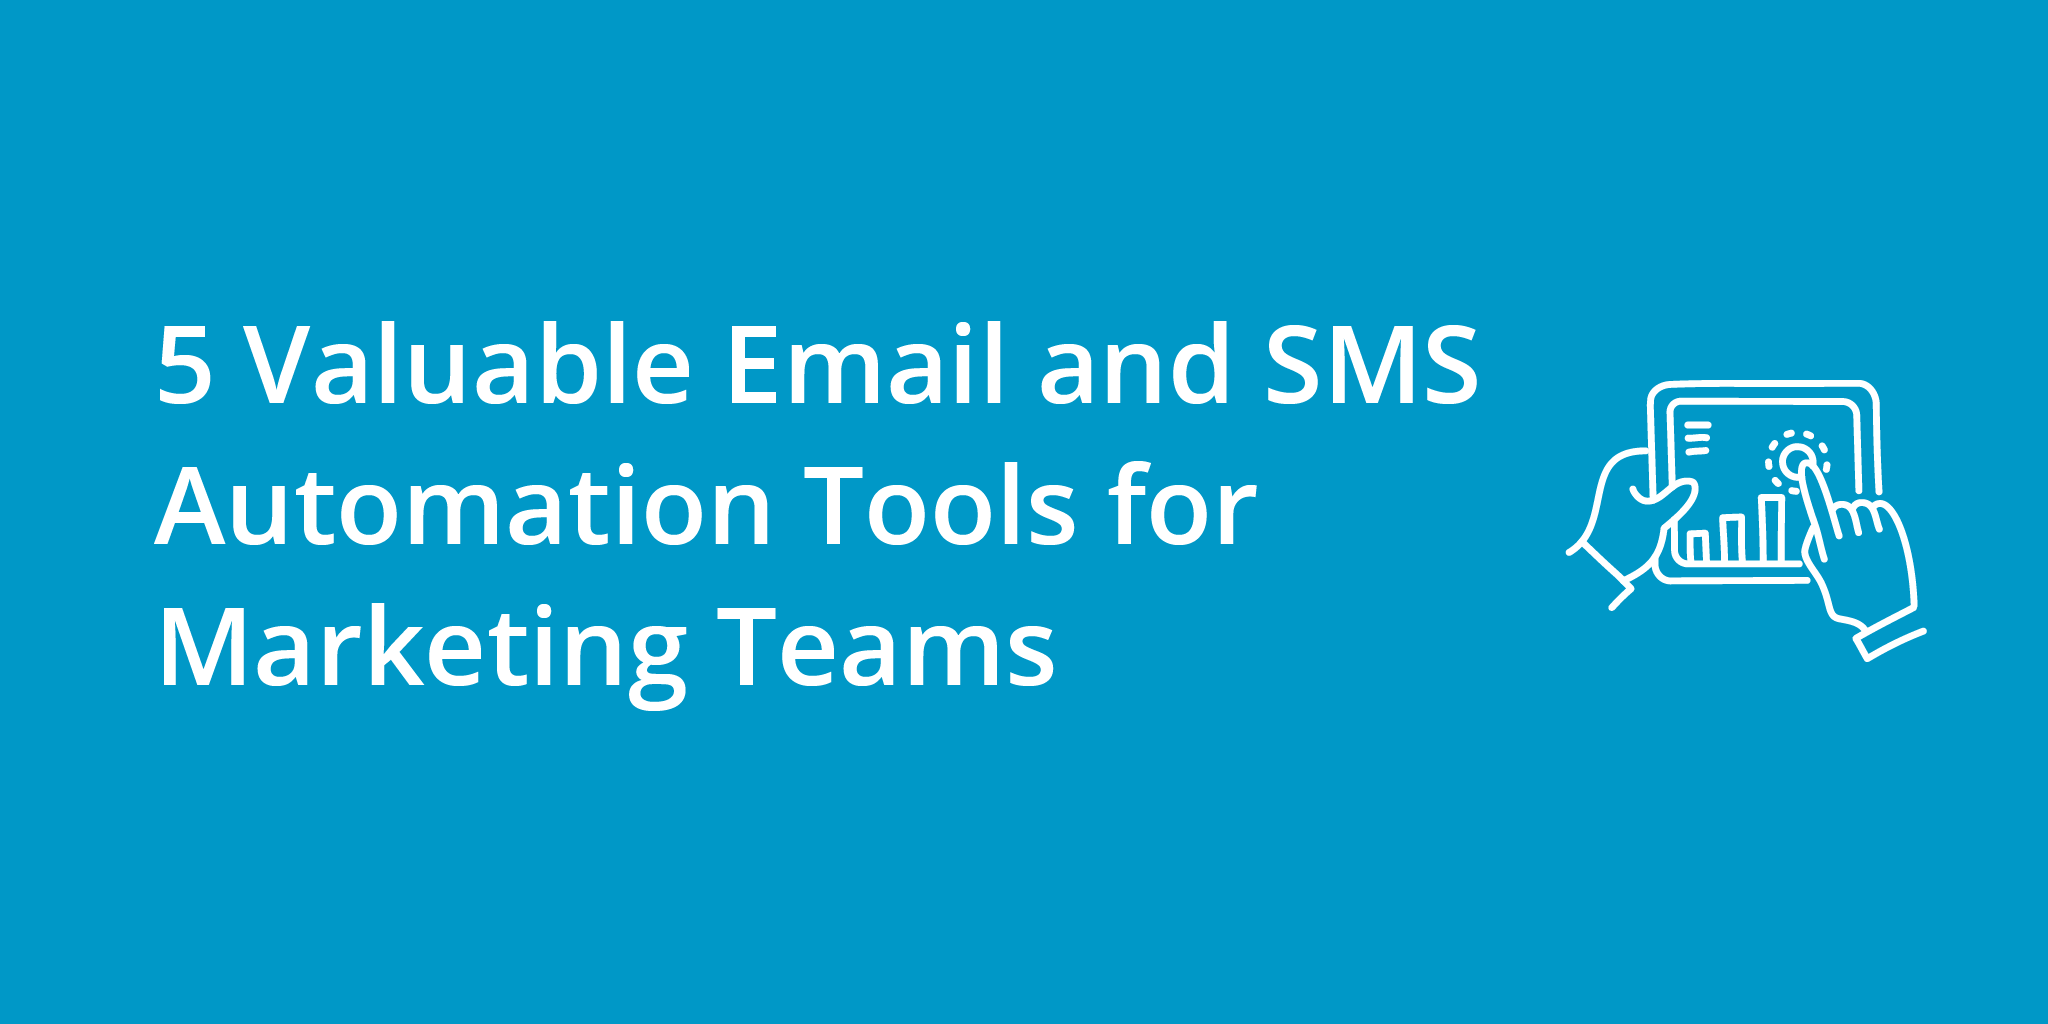 5 Valuable Email and SMS Automation Tools for Marketing Teams | Telephones for business